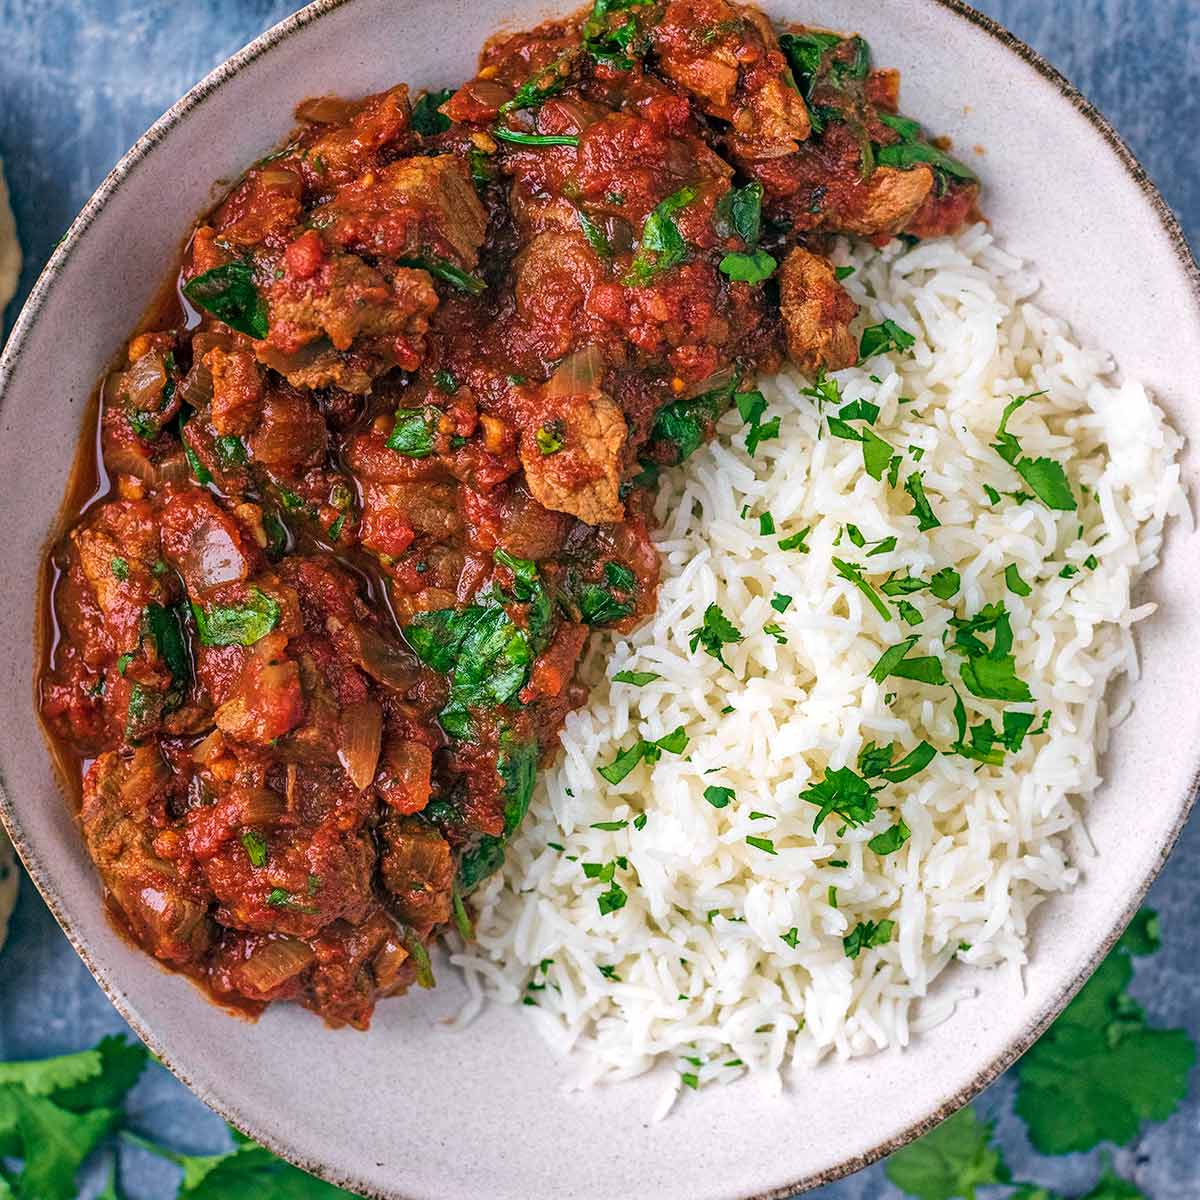 https://hungryhealthyhappy.com/wp-content/uploads/2022/02/Slow-Cooker-Beef-Curry-featured.jpg